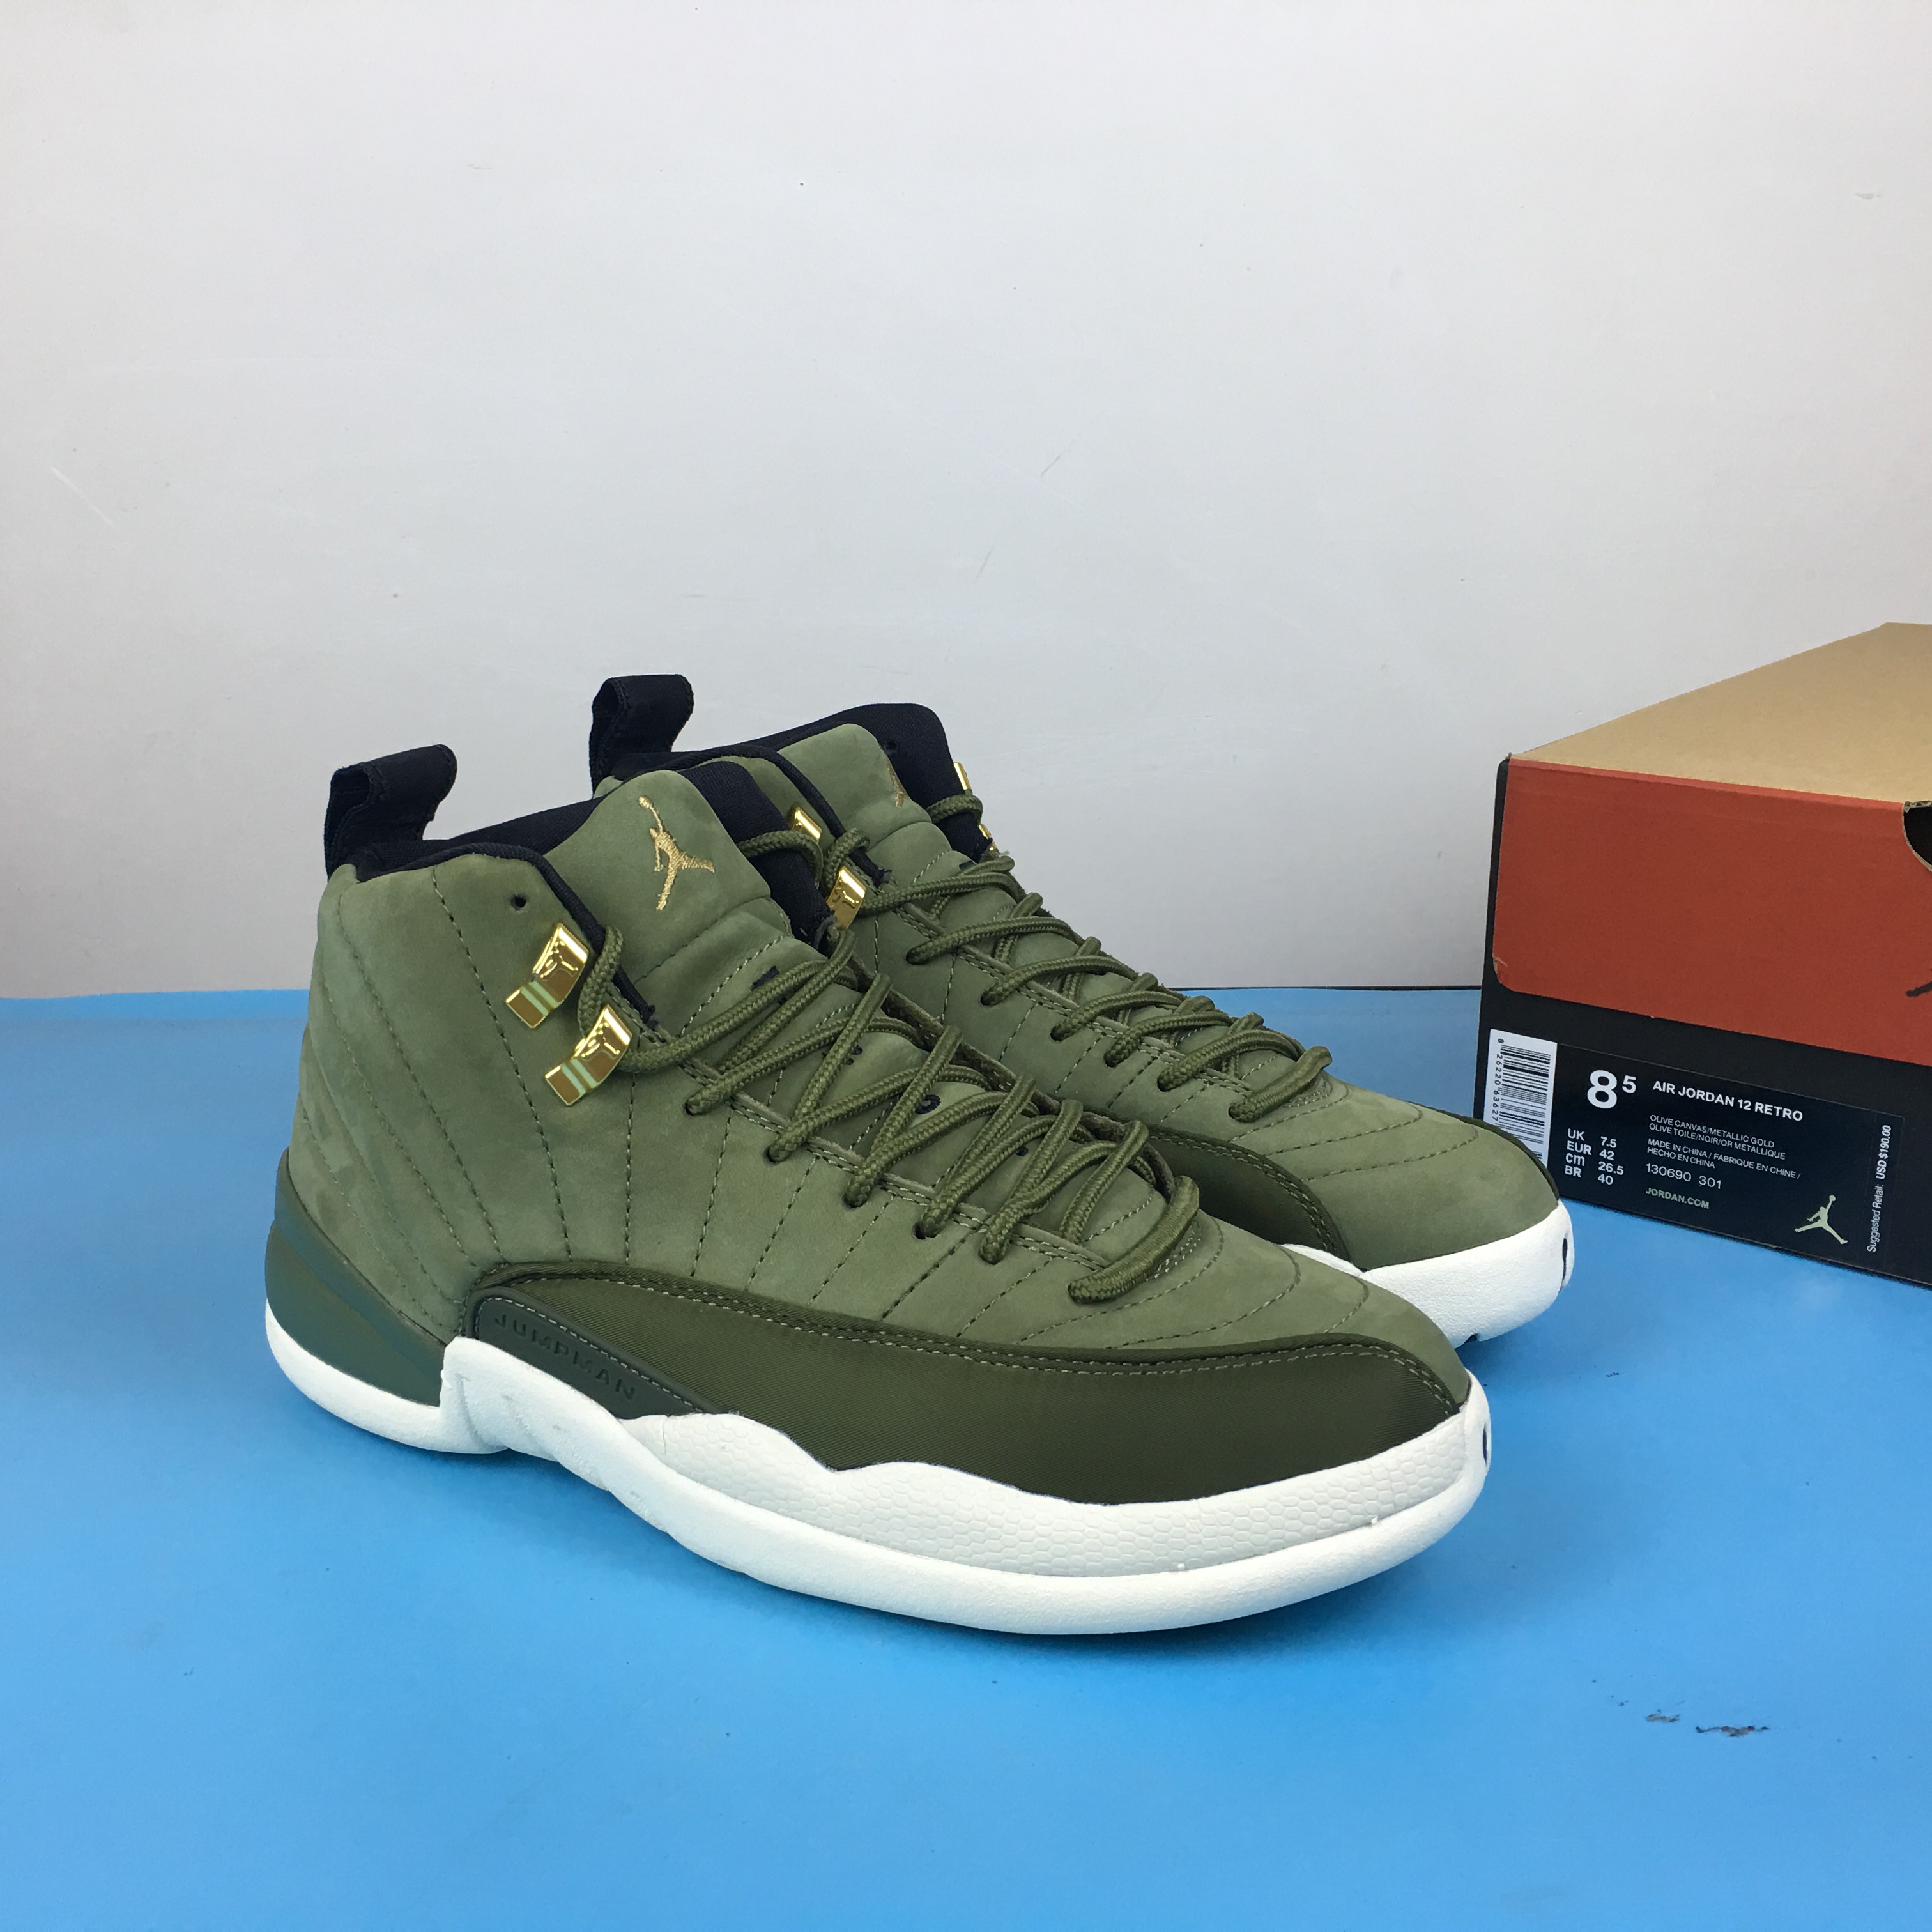 olive canvas 12s